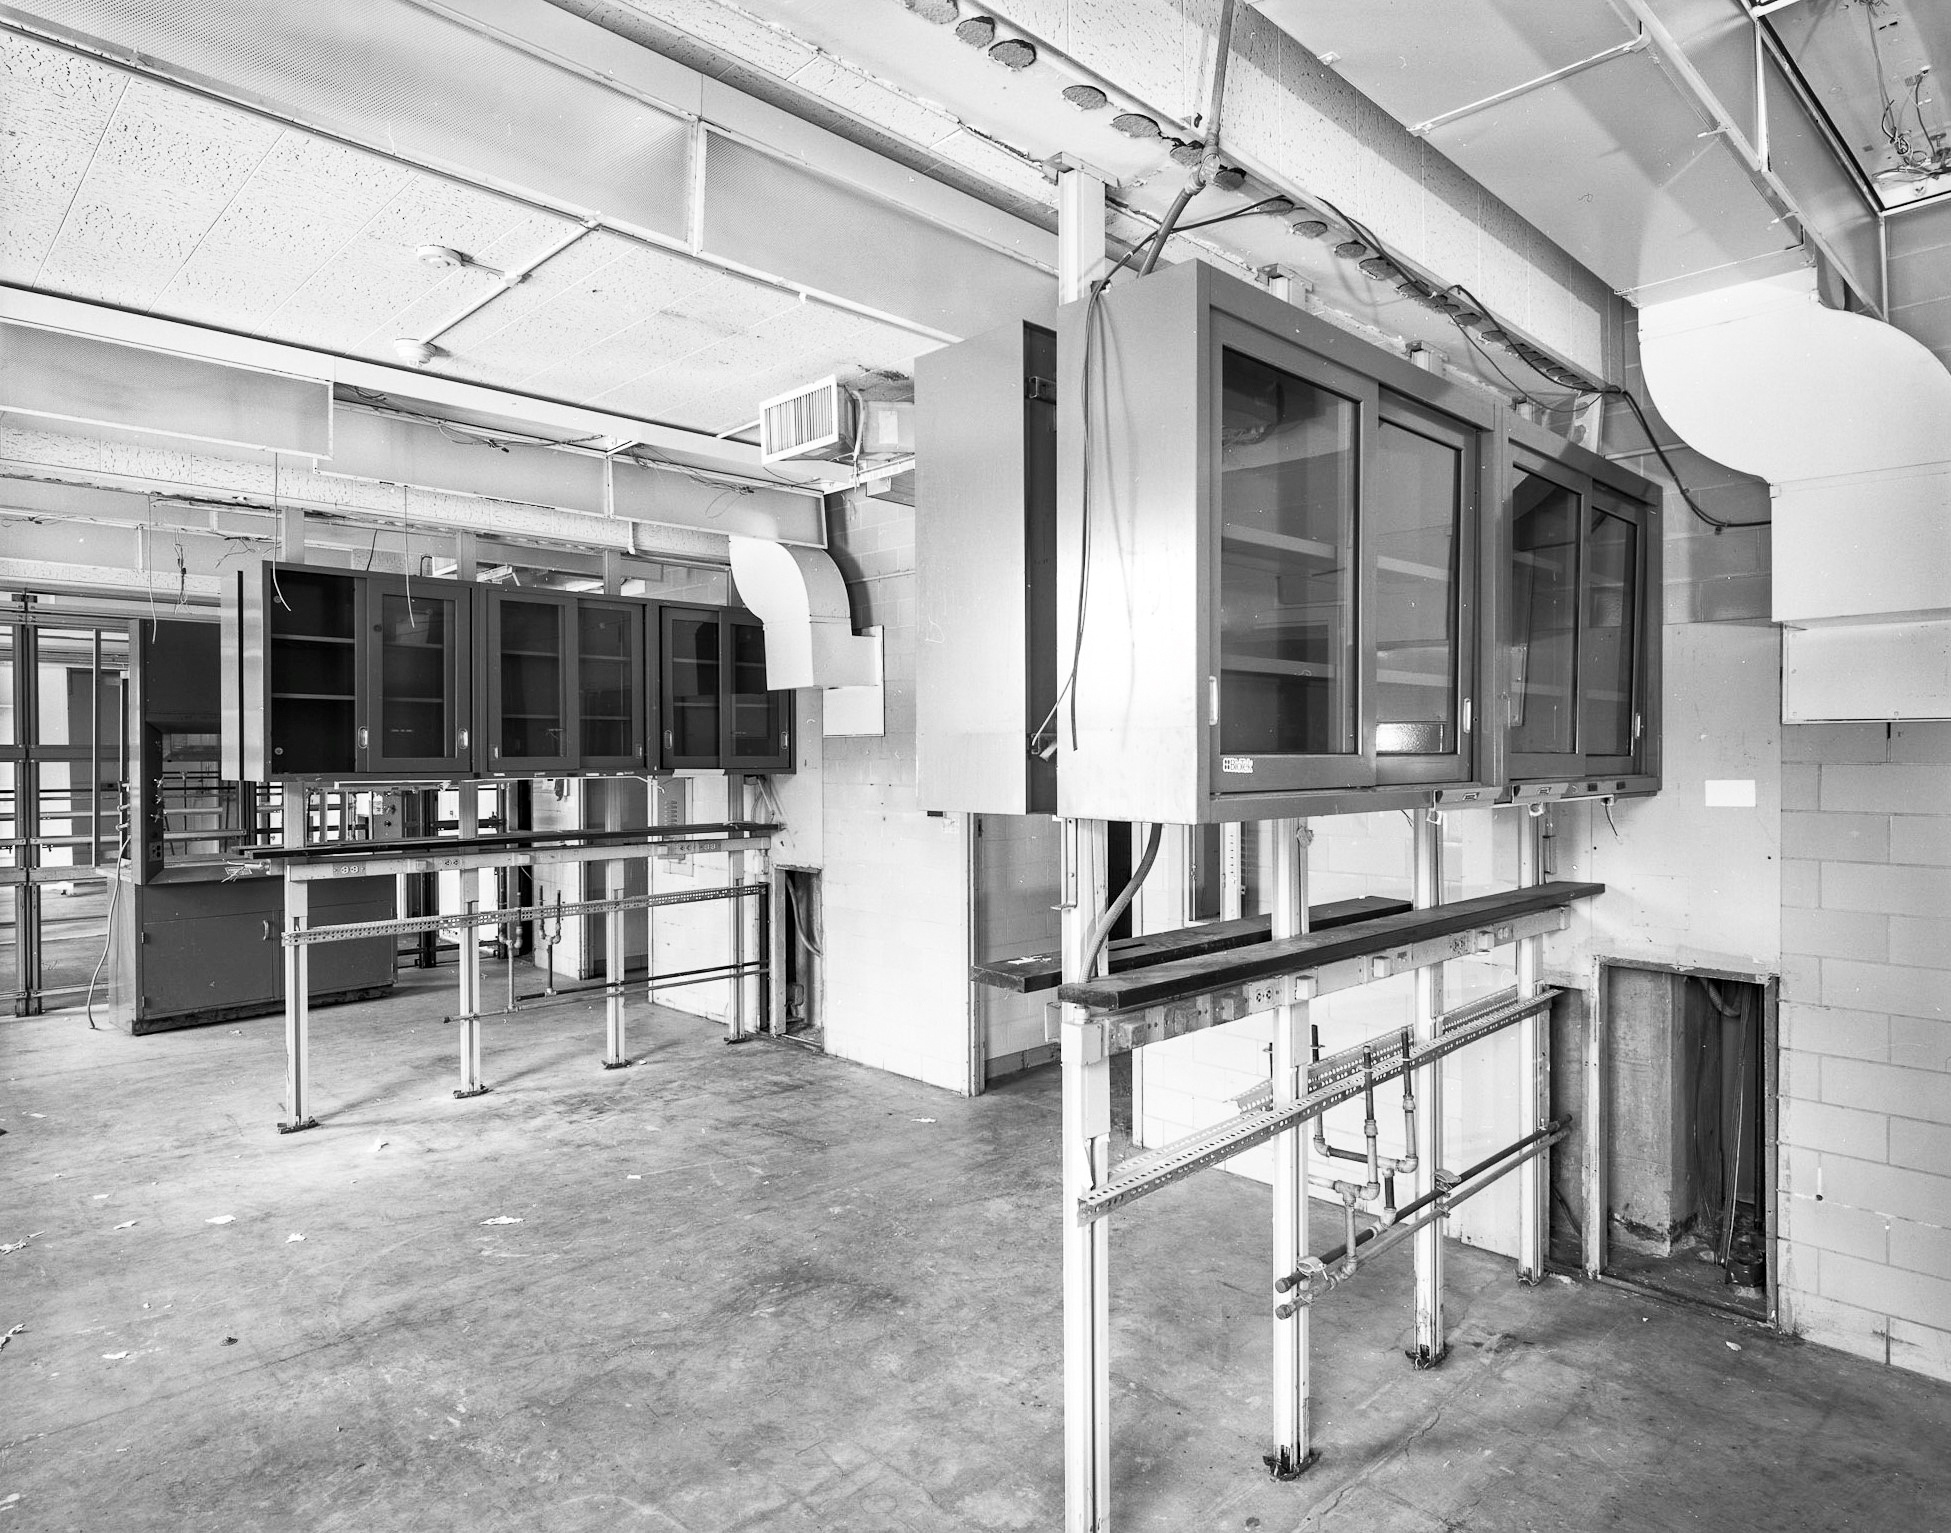 Interior black and white HABS photograph of a lab with the shelving and cupboards in place taken from the corner of the room